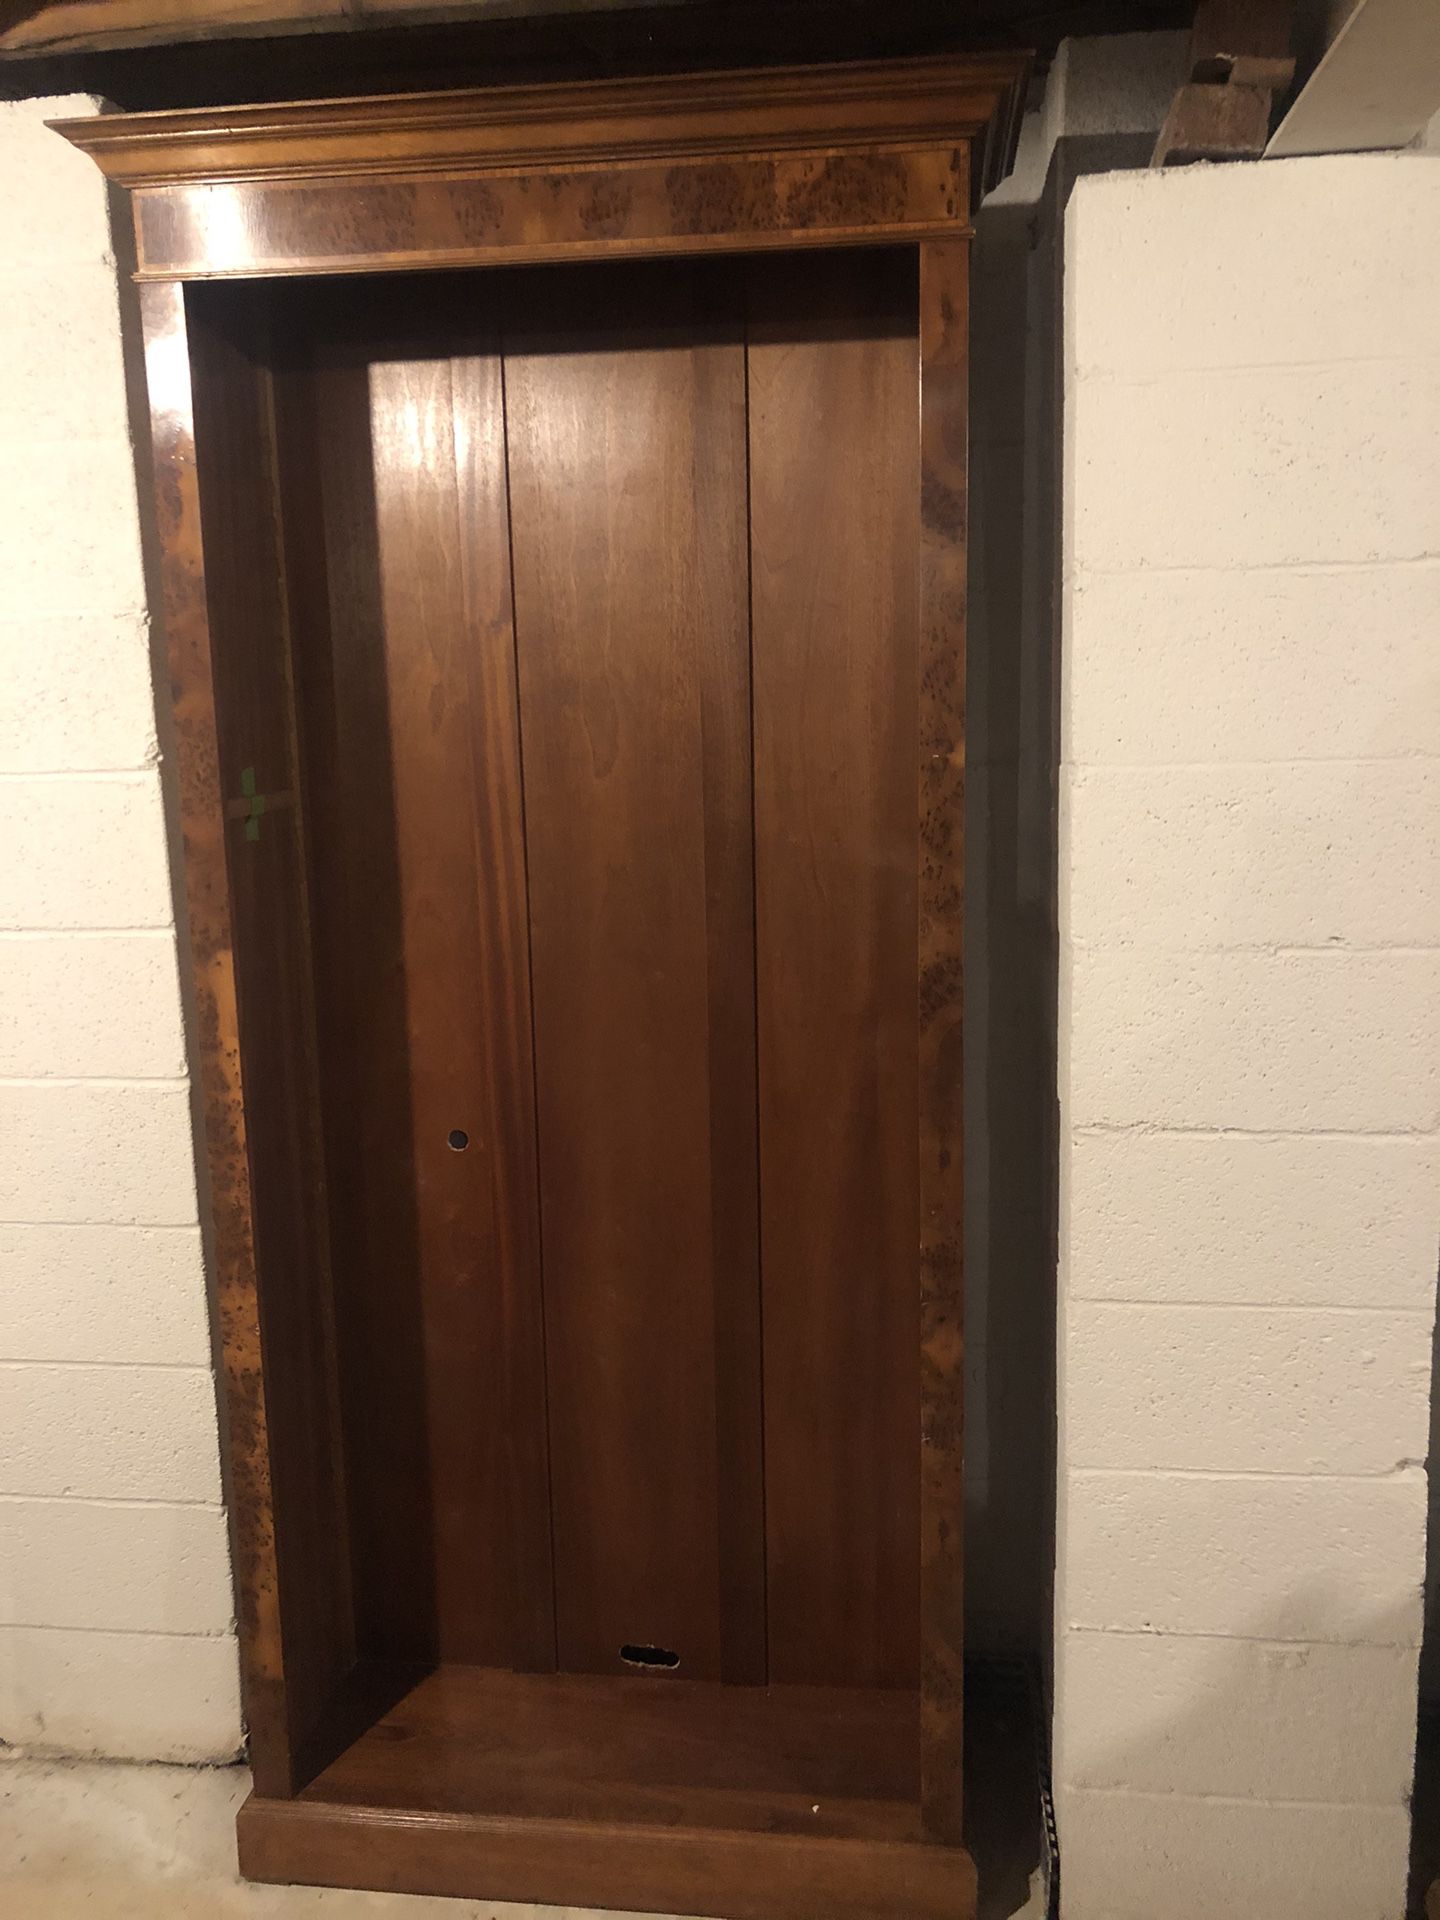 Free Beautiful Wooden Book Or Display Shelves